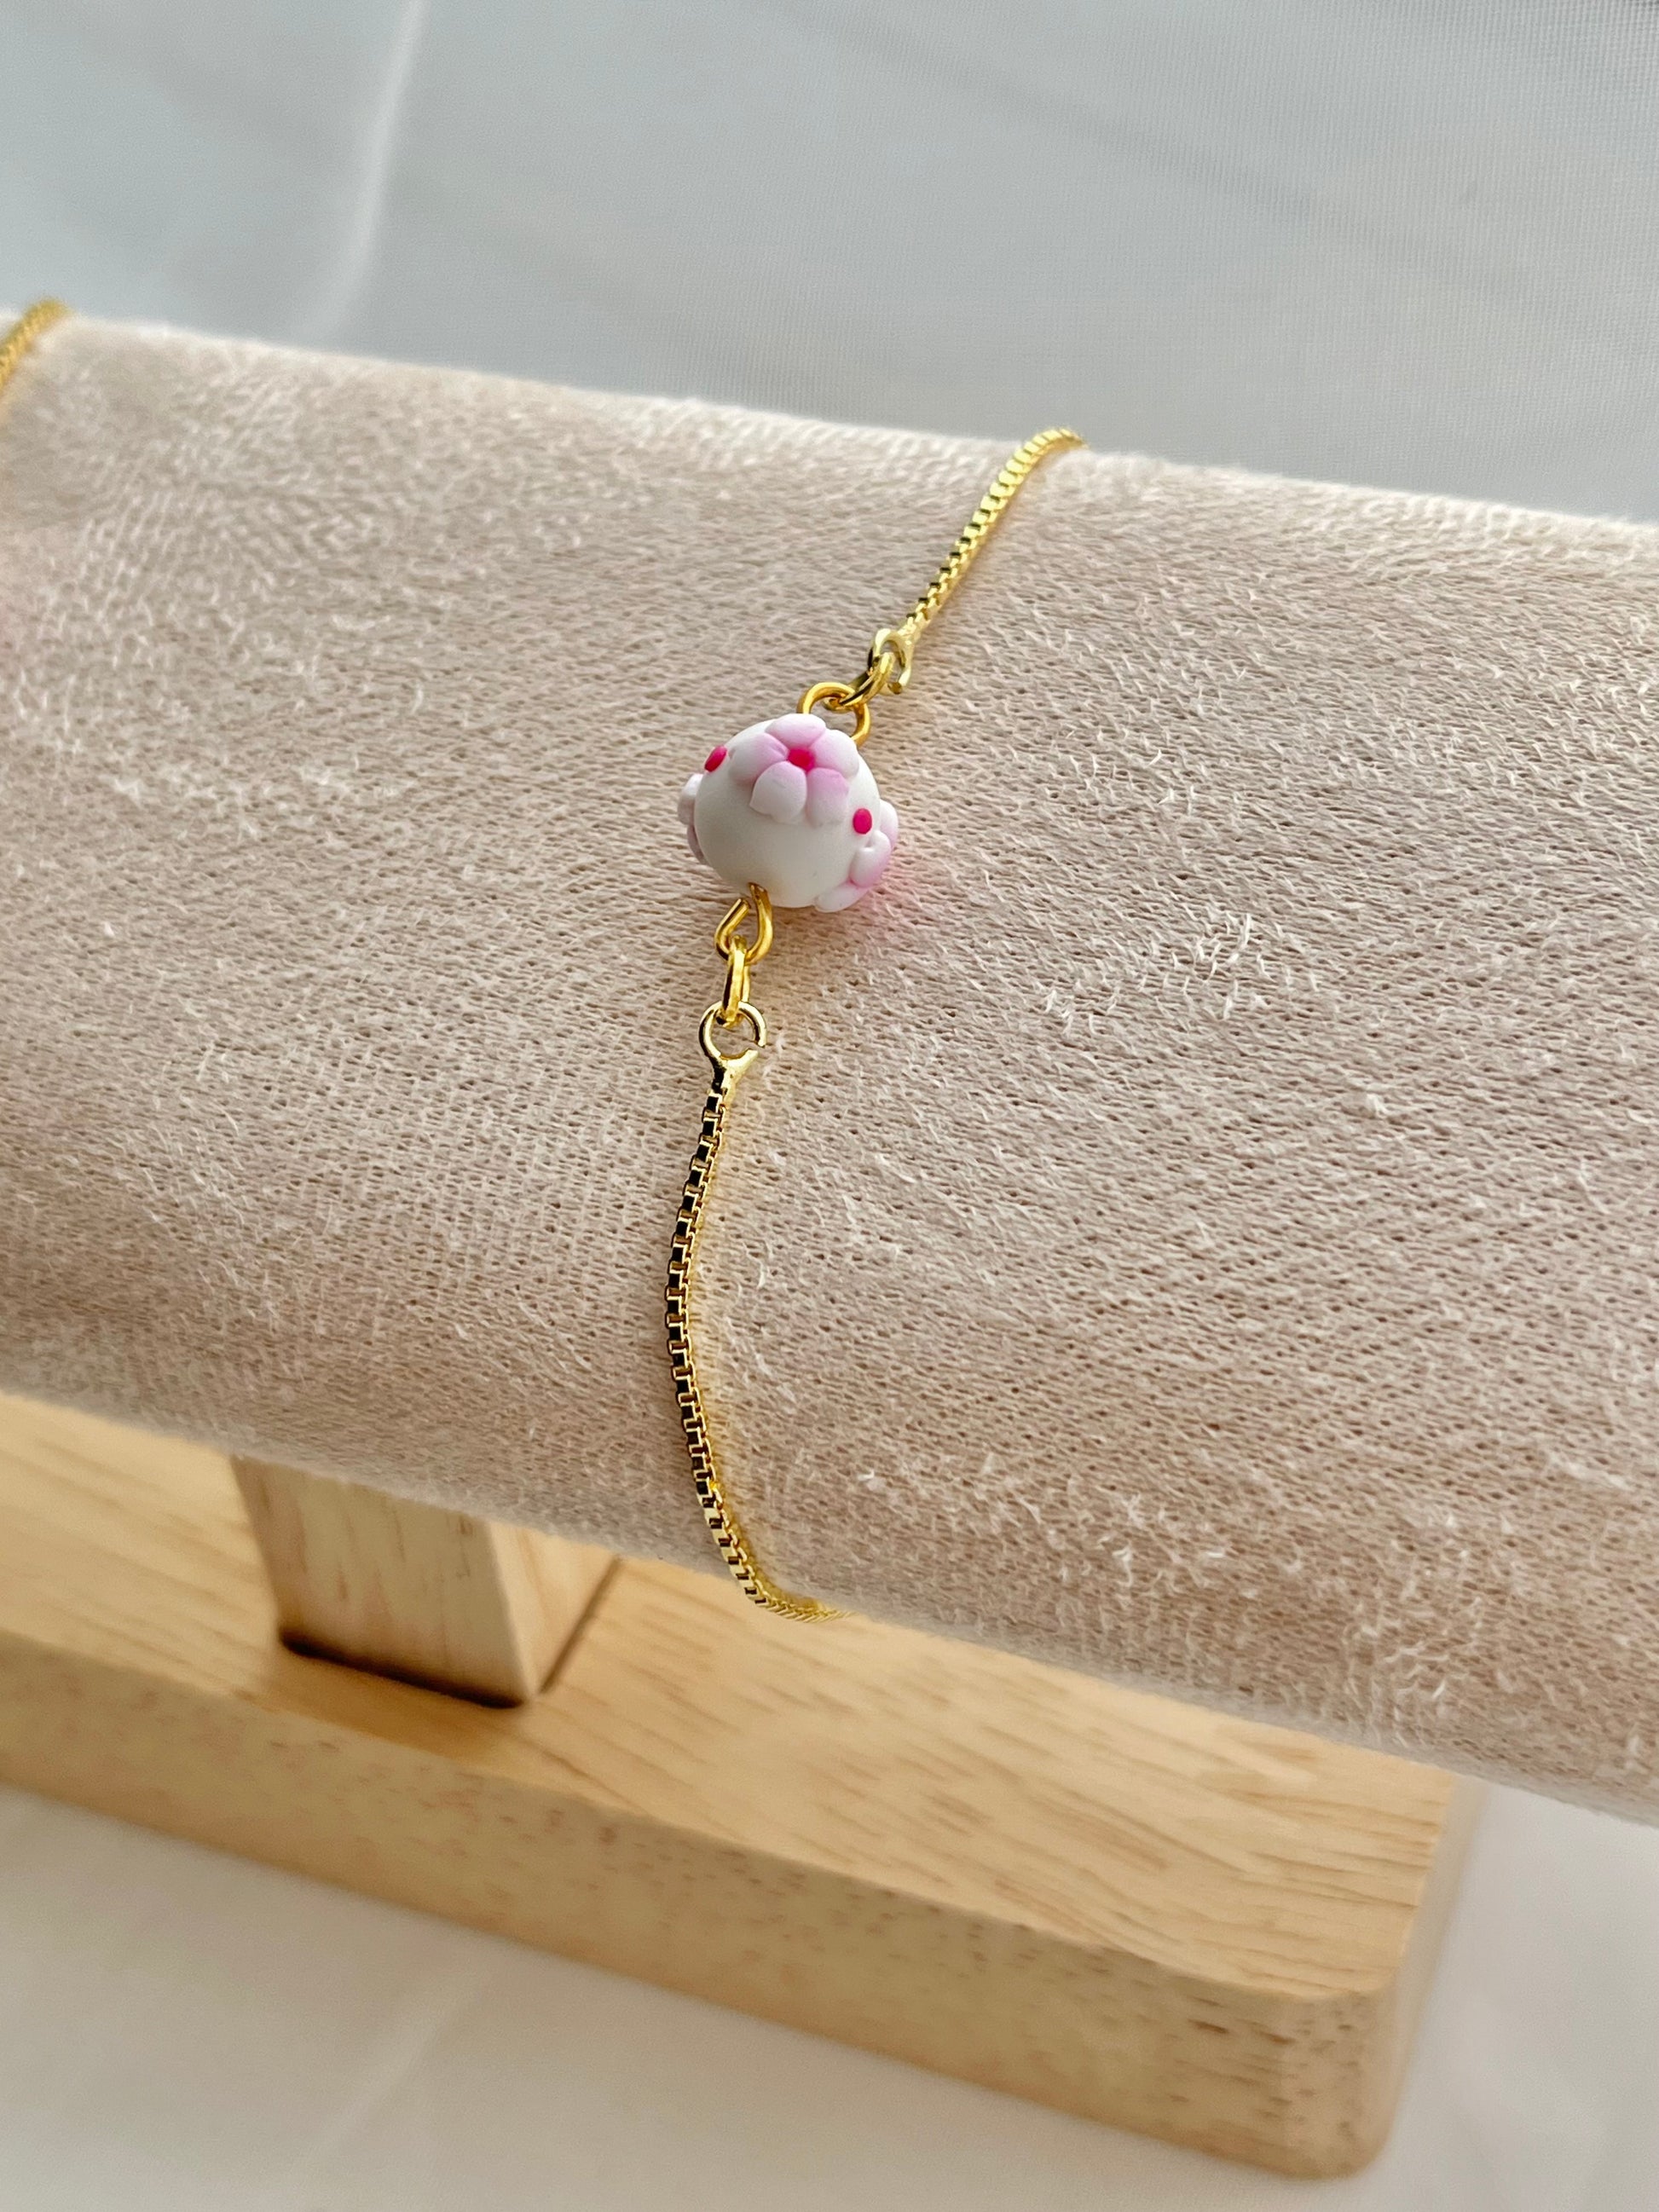 One floral bracelet in cherry blossom style with 1 bead on a bracelet stand